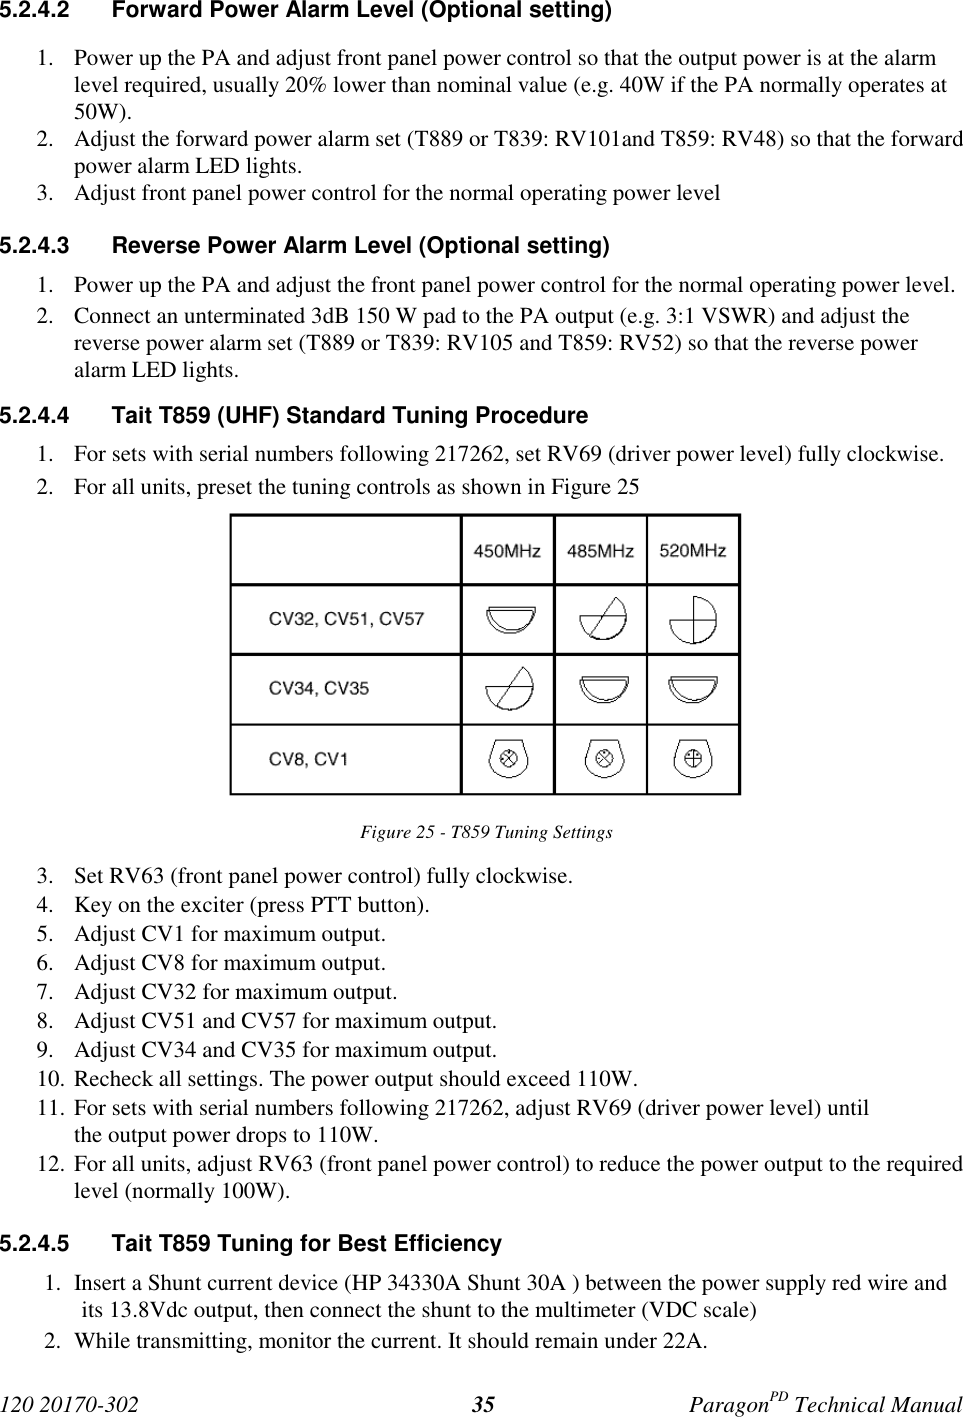 120 20170-302 ParagonPD Technical Manual355.2.4.2  Forward Power Alarm Level (Optional setting)1. Power up the PA and adjust front panel power control so that the output power is at the alarmlevel required, usually 20% lower than nominal value (e.g. 40W if the PA normally operates at50W).2. Adjust the forward power alarm set (T889 or T839: RV101and T859: RV48) so that the forwardpower alarm LED lights.3. Adjust front panel power control for the normal operating power level5.2.4.3  Reverse Power Alarm Level (Optional setting)1. Power up the PA and adjust the front panel power control for the normal operating power level.2. Connect an unterminated 3dB 150 W pad to the PA output (e.g. 3:1 VSWR) and adjust thereverse power alarm set (T889 or T839: RV105 and T859: RV52) so that the reverse poweralarm LED lights.5.2.4.4  Tait T859 (UHF) Standard Tuning Procedure1. For sets with serial numbers following 217262, set RV69 (driver power level) fully clockwise.2. For all units, preset the tuning controls as shown in Figure 25Figure 25 - T859 Tuning Settings3. Set RV63 (front panel power control) fully clockwise.4. Key on the exciter (press PTT button).5. Adjust CV1 for maximum output.6. Adjust CV8 for maximum output.7. Adjust CV32 for maximum output.8. Adjust CV51 and CV57 for maximum output.9. Adjust CV34 and CV35 for maximum output.10. Recheck all settings. The power output should exceed 110W.11. For sets with serial numbers following 217262, adjust RV69 (driver power level) untilthe output power drops to 110W.12. For all units, adjust RV63 (front panel power control) to reduce the power output to the requiredlevel (normally 100W).5.2.4.5  Tait T859 Tuning for Best Efficiency1. Insert a Shunt current device (HP 34330A Shunt 30A ) between the power supply red wire andits 13.8Vdc output, then connect the shunt to the multimeter (VDC scale)2. While transmitting, monitor the current. It should remain under 22A.